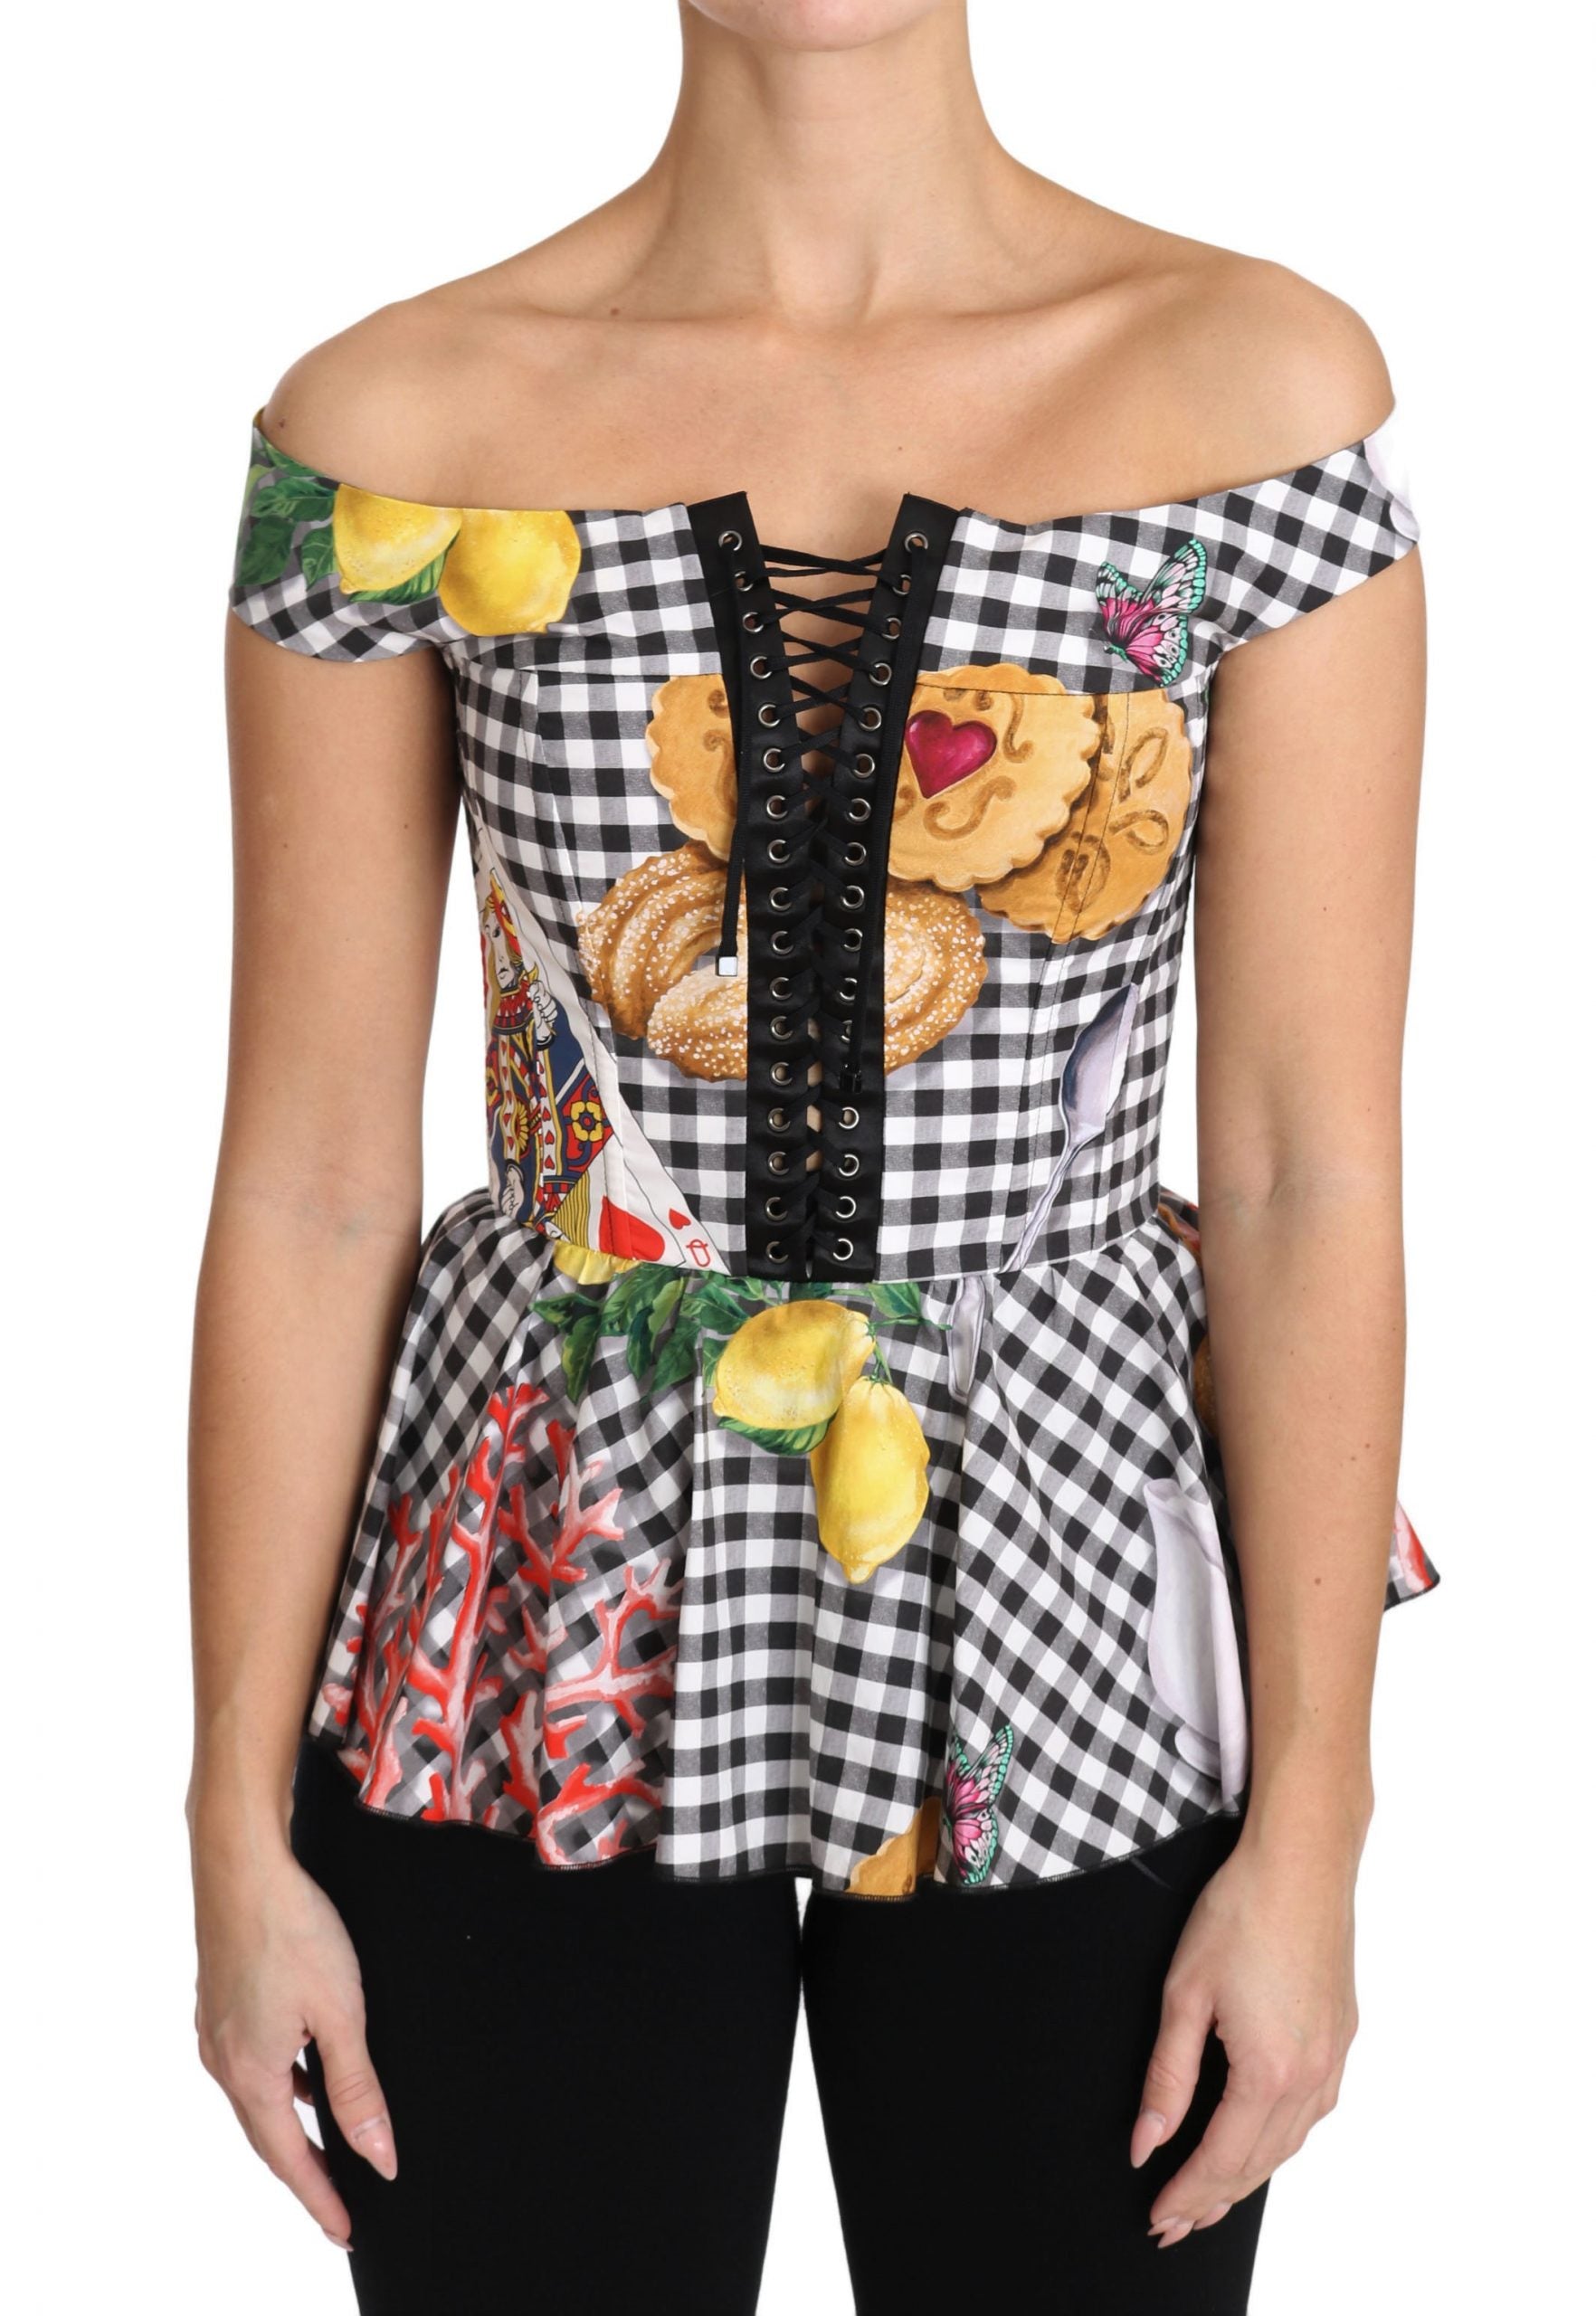 Chic Checkered Corset Top Blouse